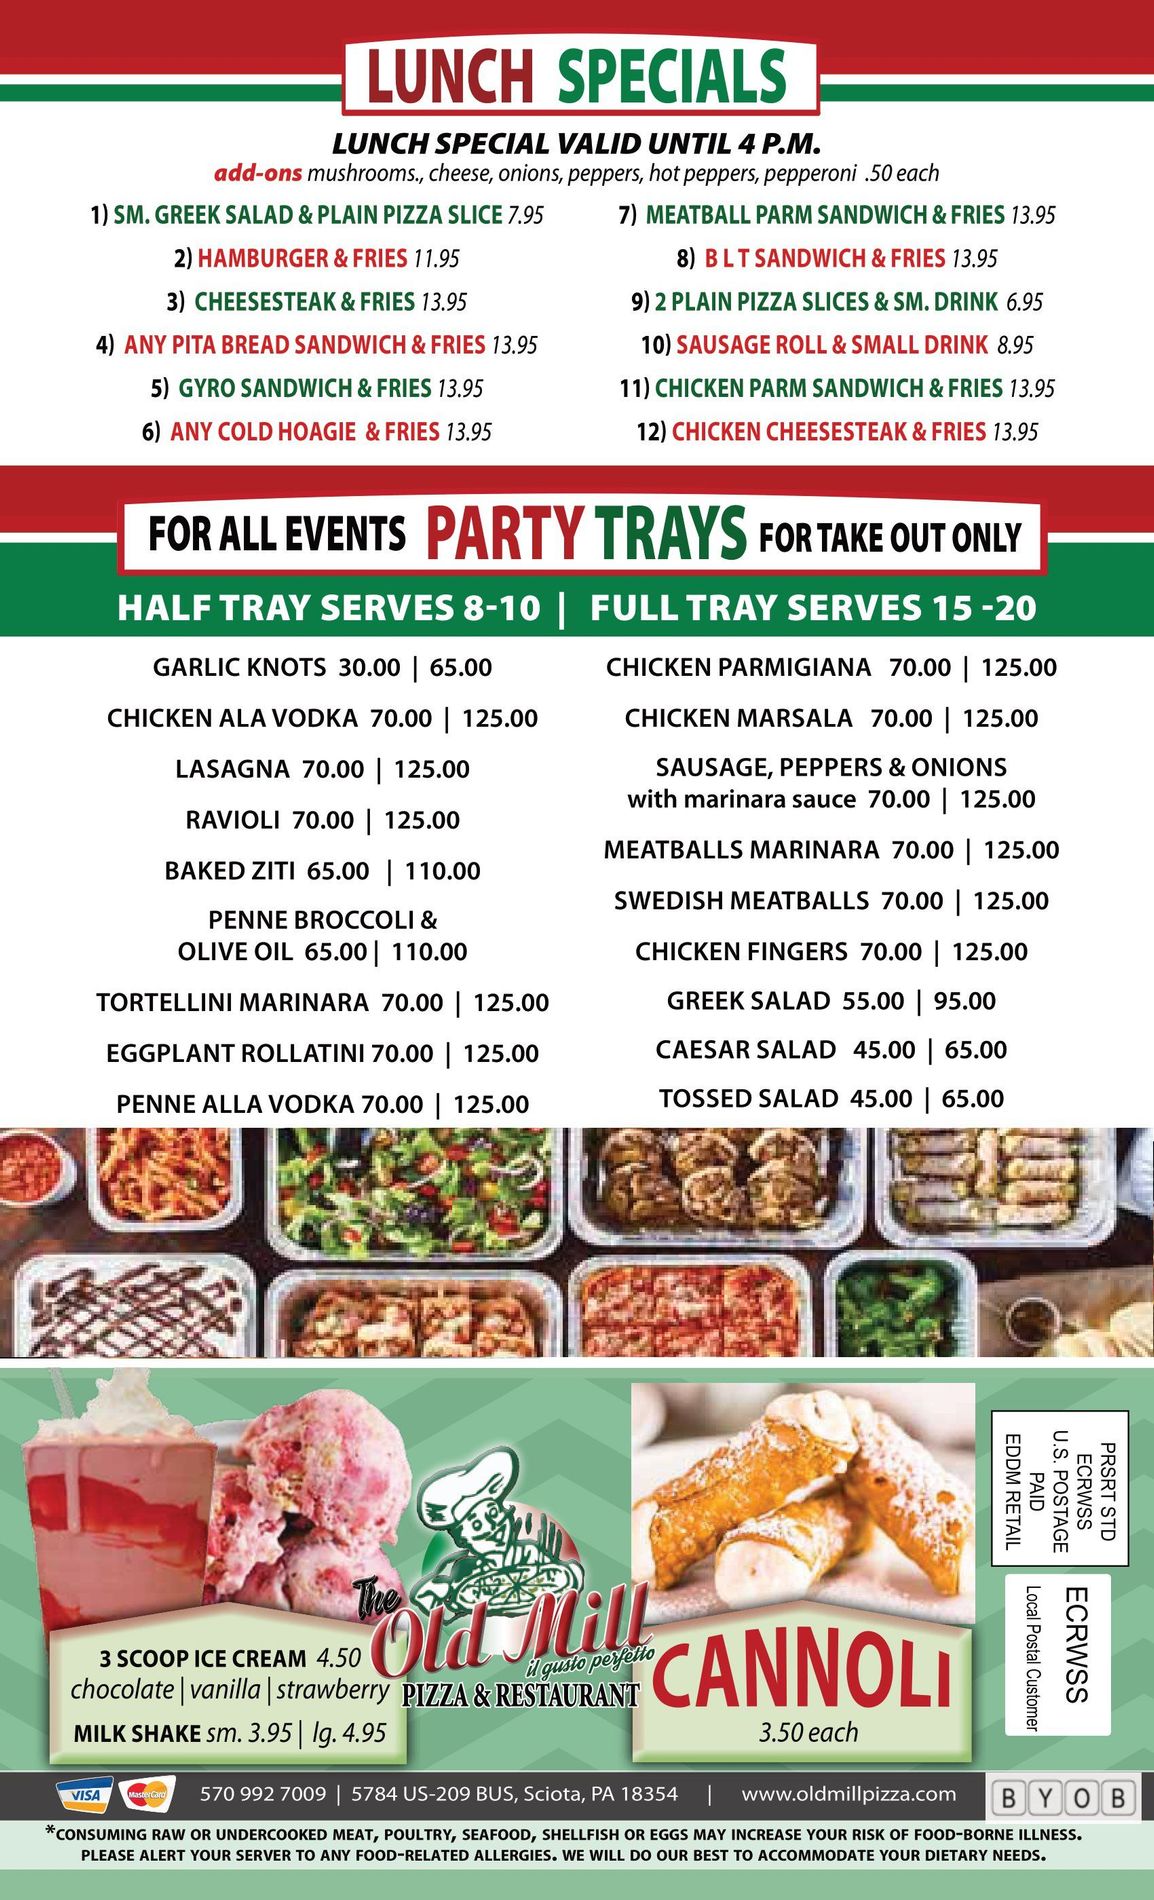 Old Mill Pizzeria - Lunch Specials and Party Trays Menu